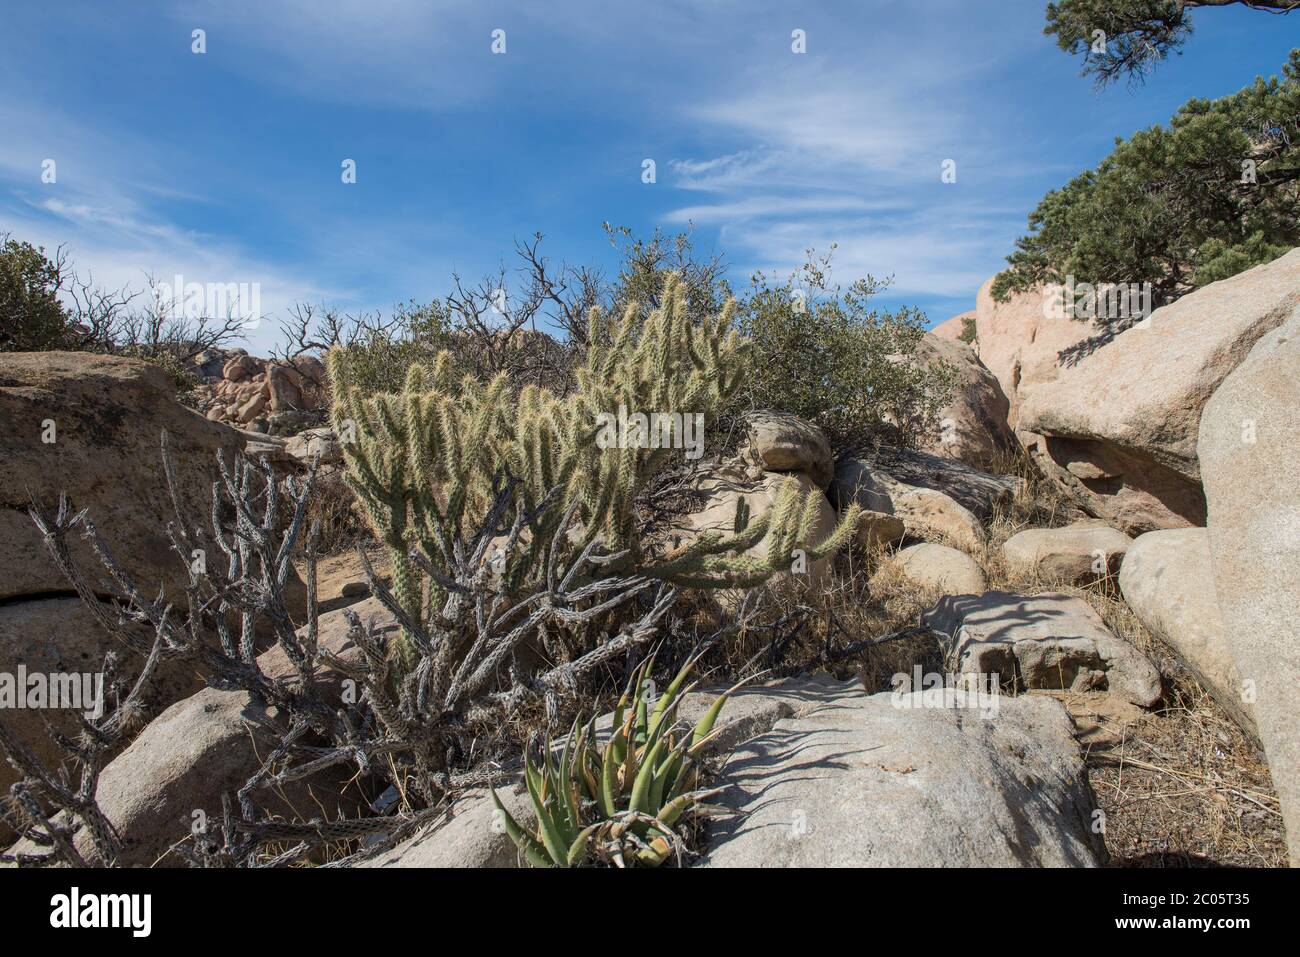 Cactus on the rocky mountains in the desert of Mexico, near La rumorosa and Mexicali, Baja California, Mexican landscape concept Stock Photo